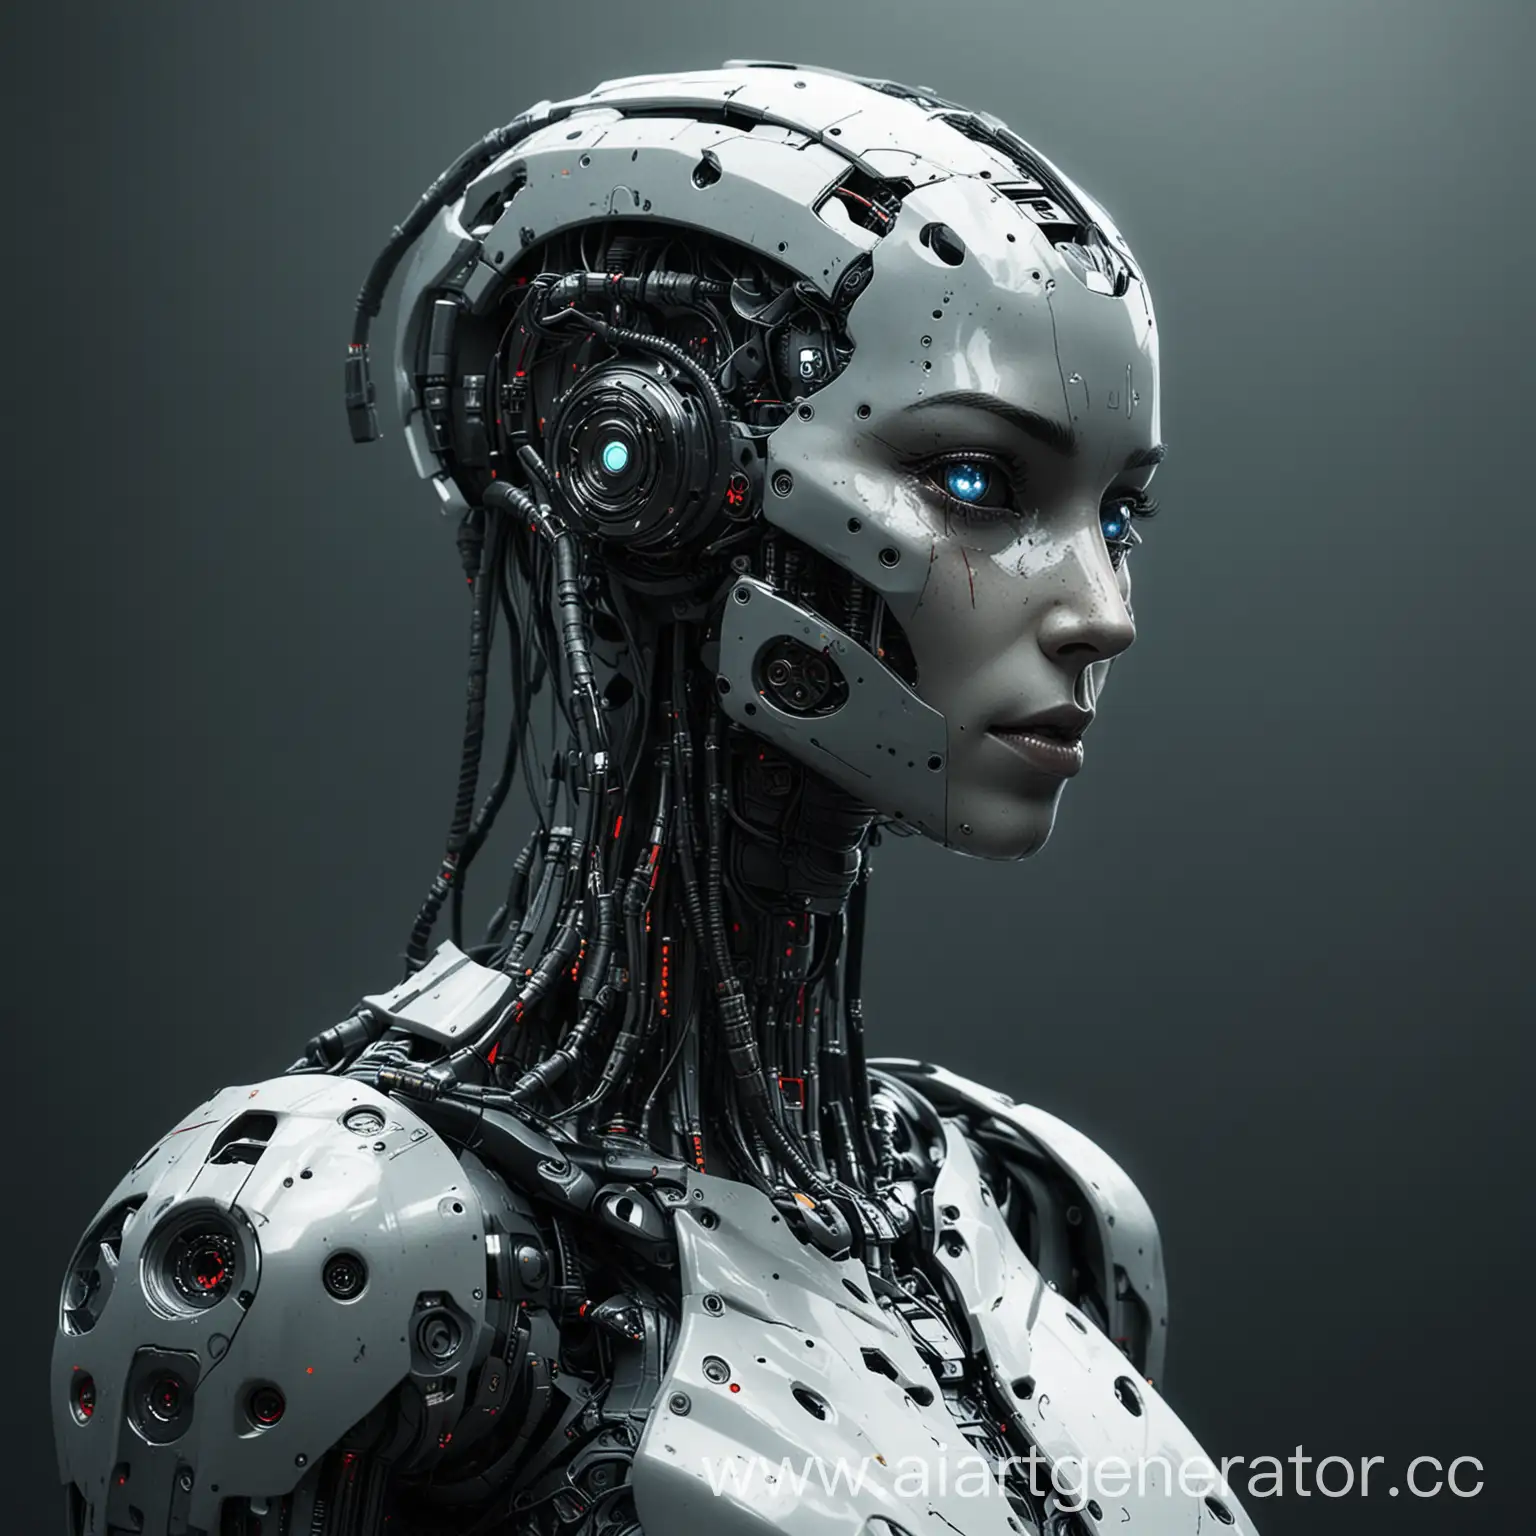 Cyberpunk-Robot-with-Humanoid-Features